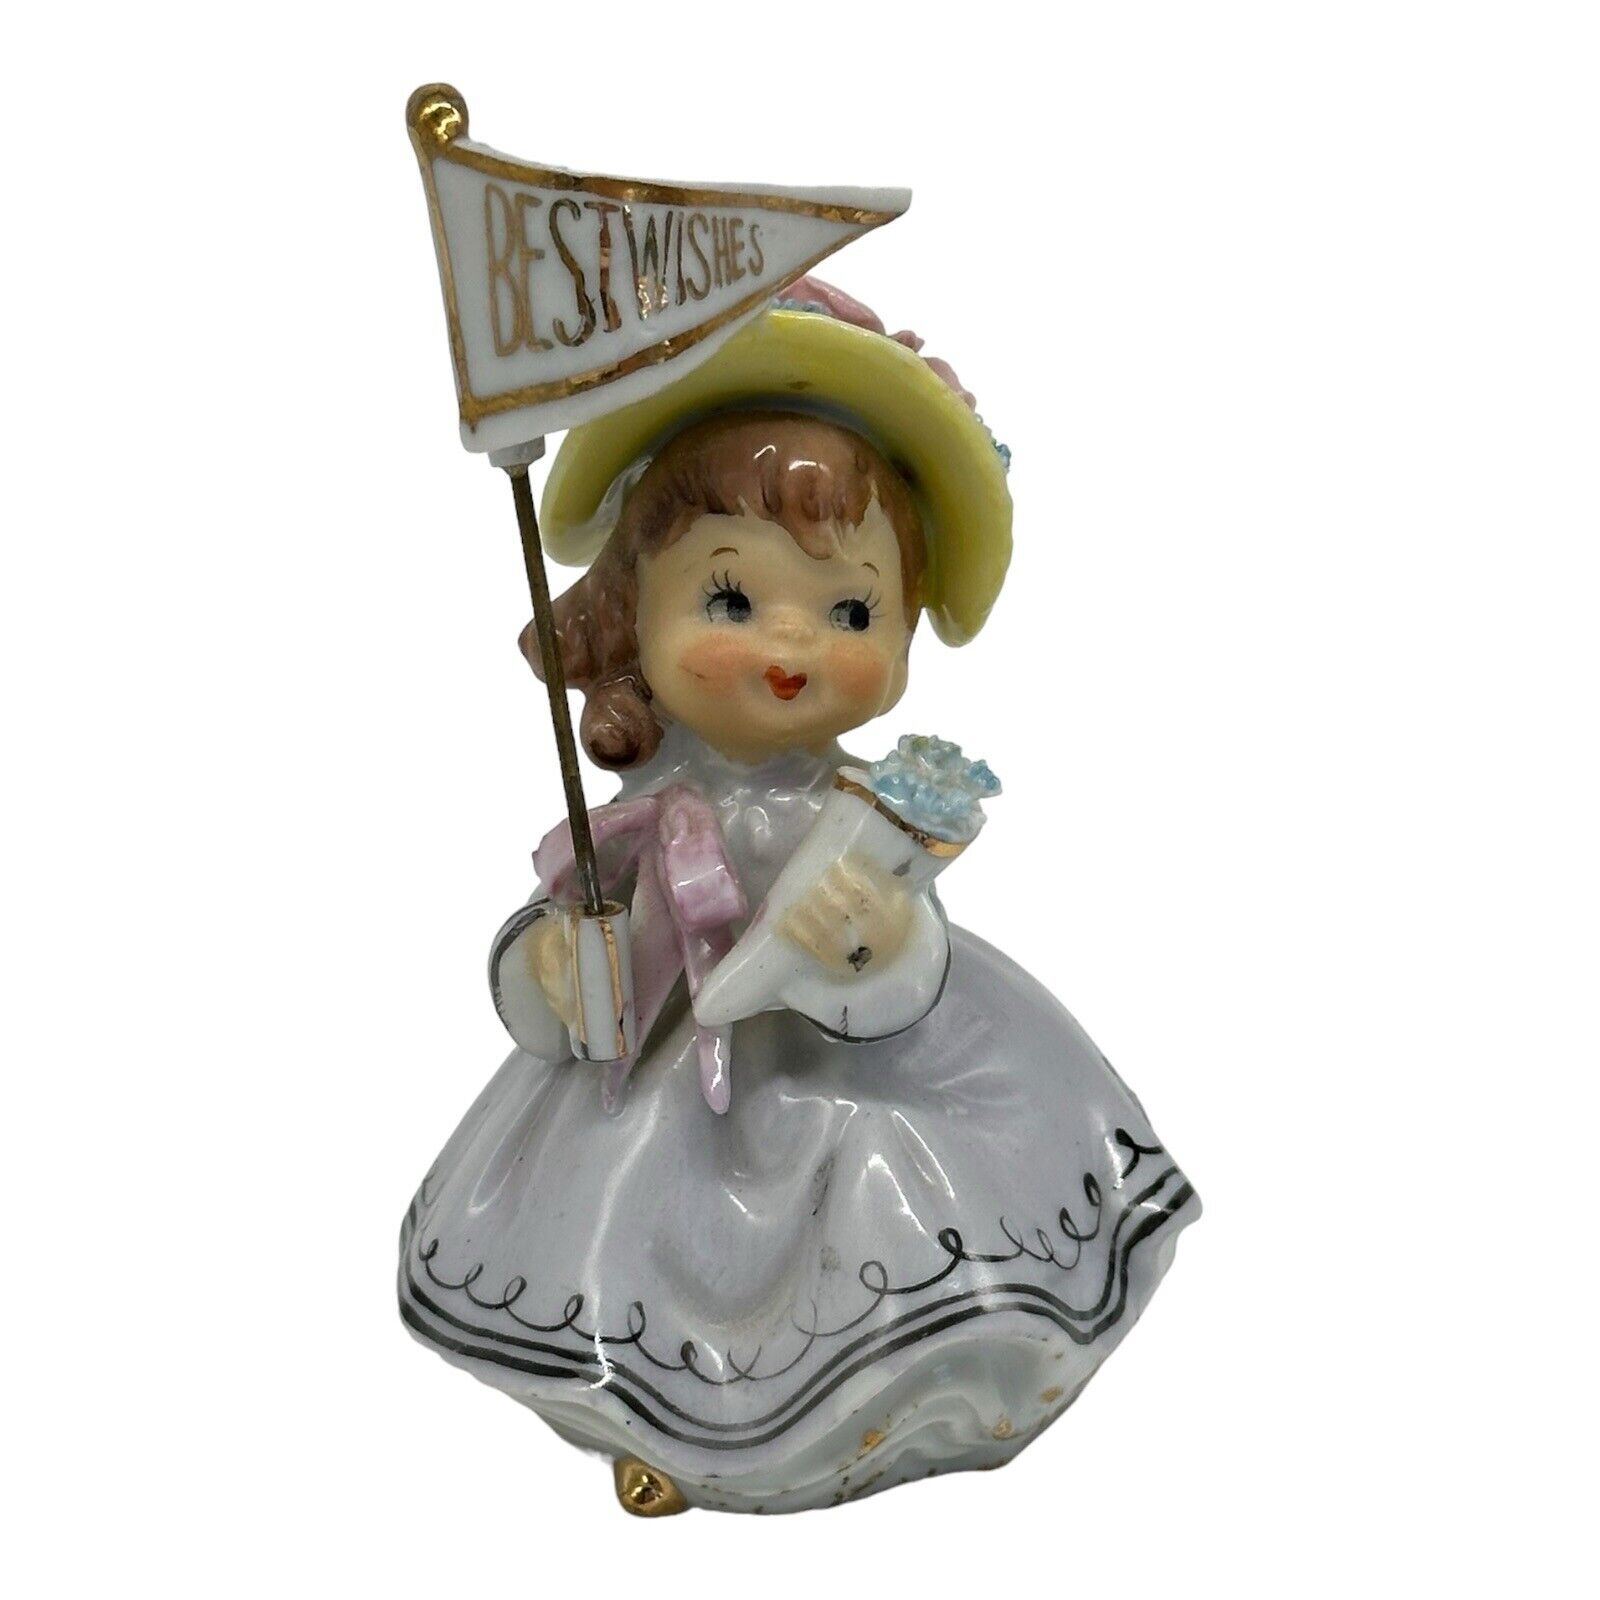 Vintage 1950s Girl  Best Wishes Flag Lady Figurine  C163  Porcelain  4.25” Tall